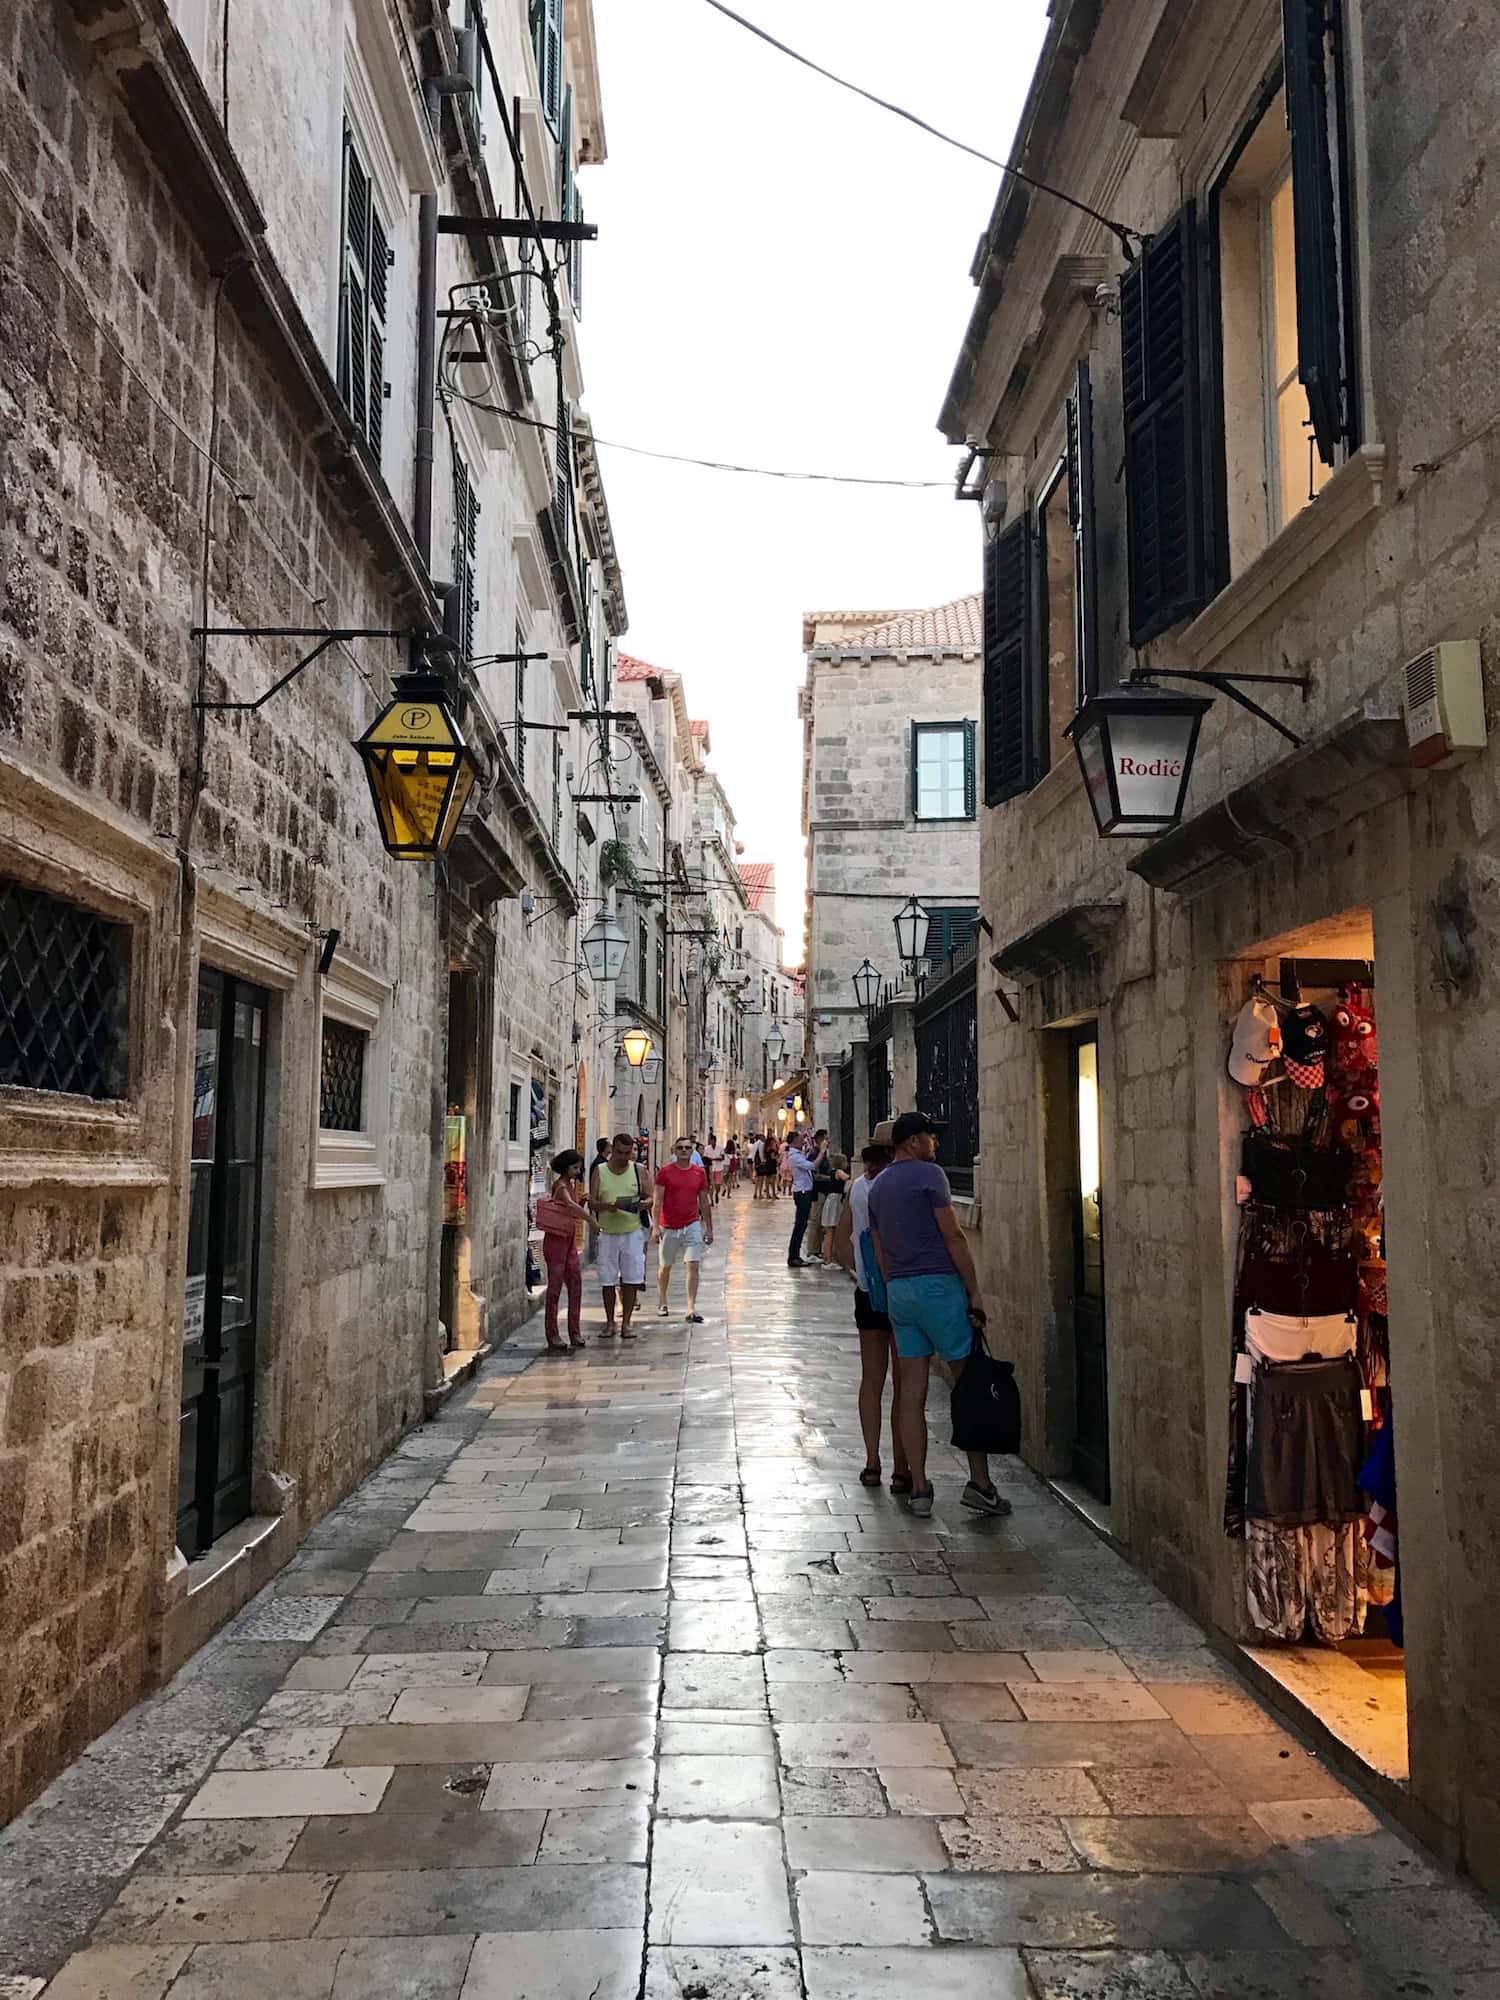 street of Dubrovnik had a famous Old Town